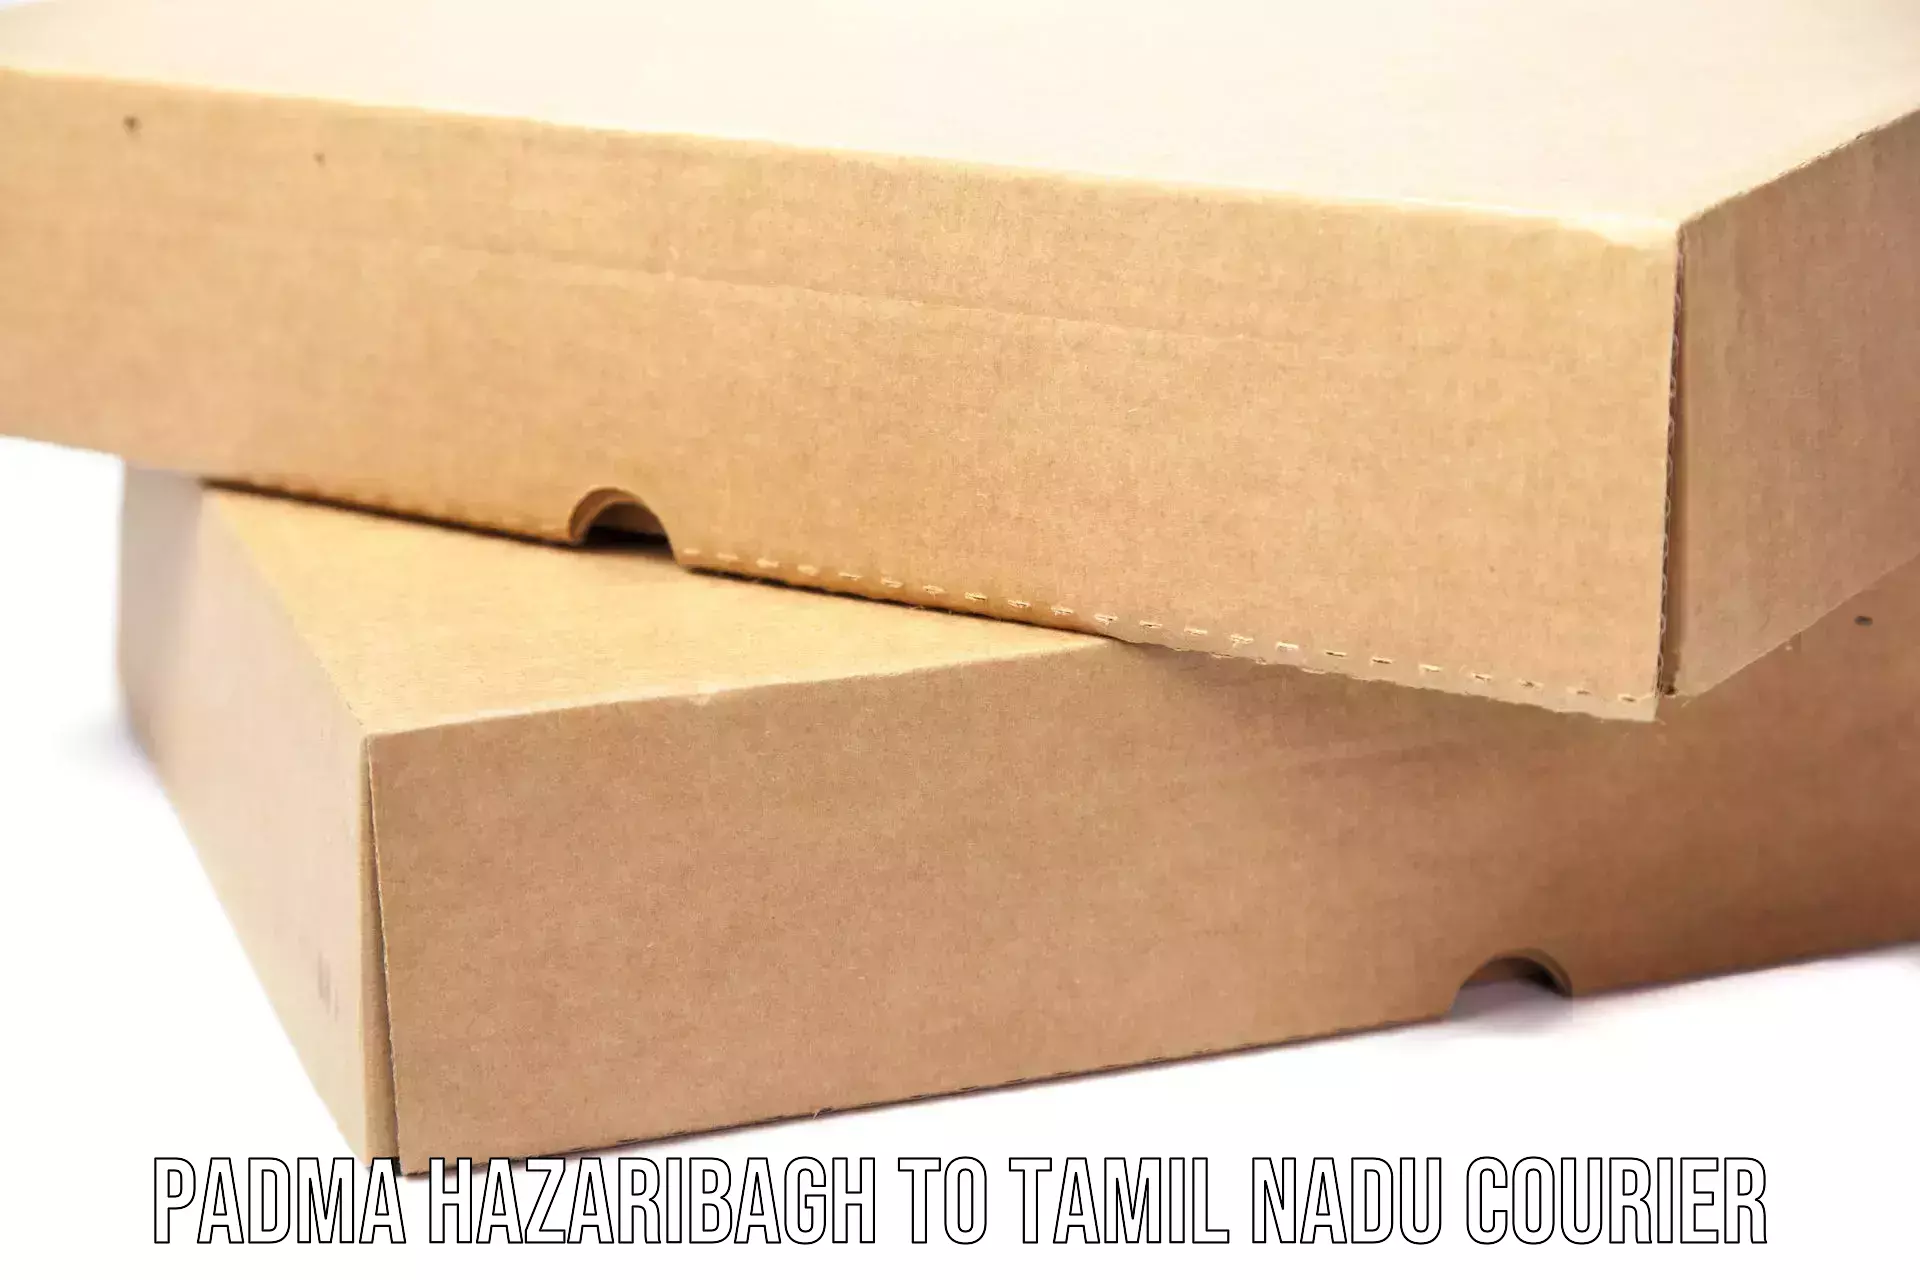 Scalable shipping solutions Padma Hazaribagh to Tamil Nadu